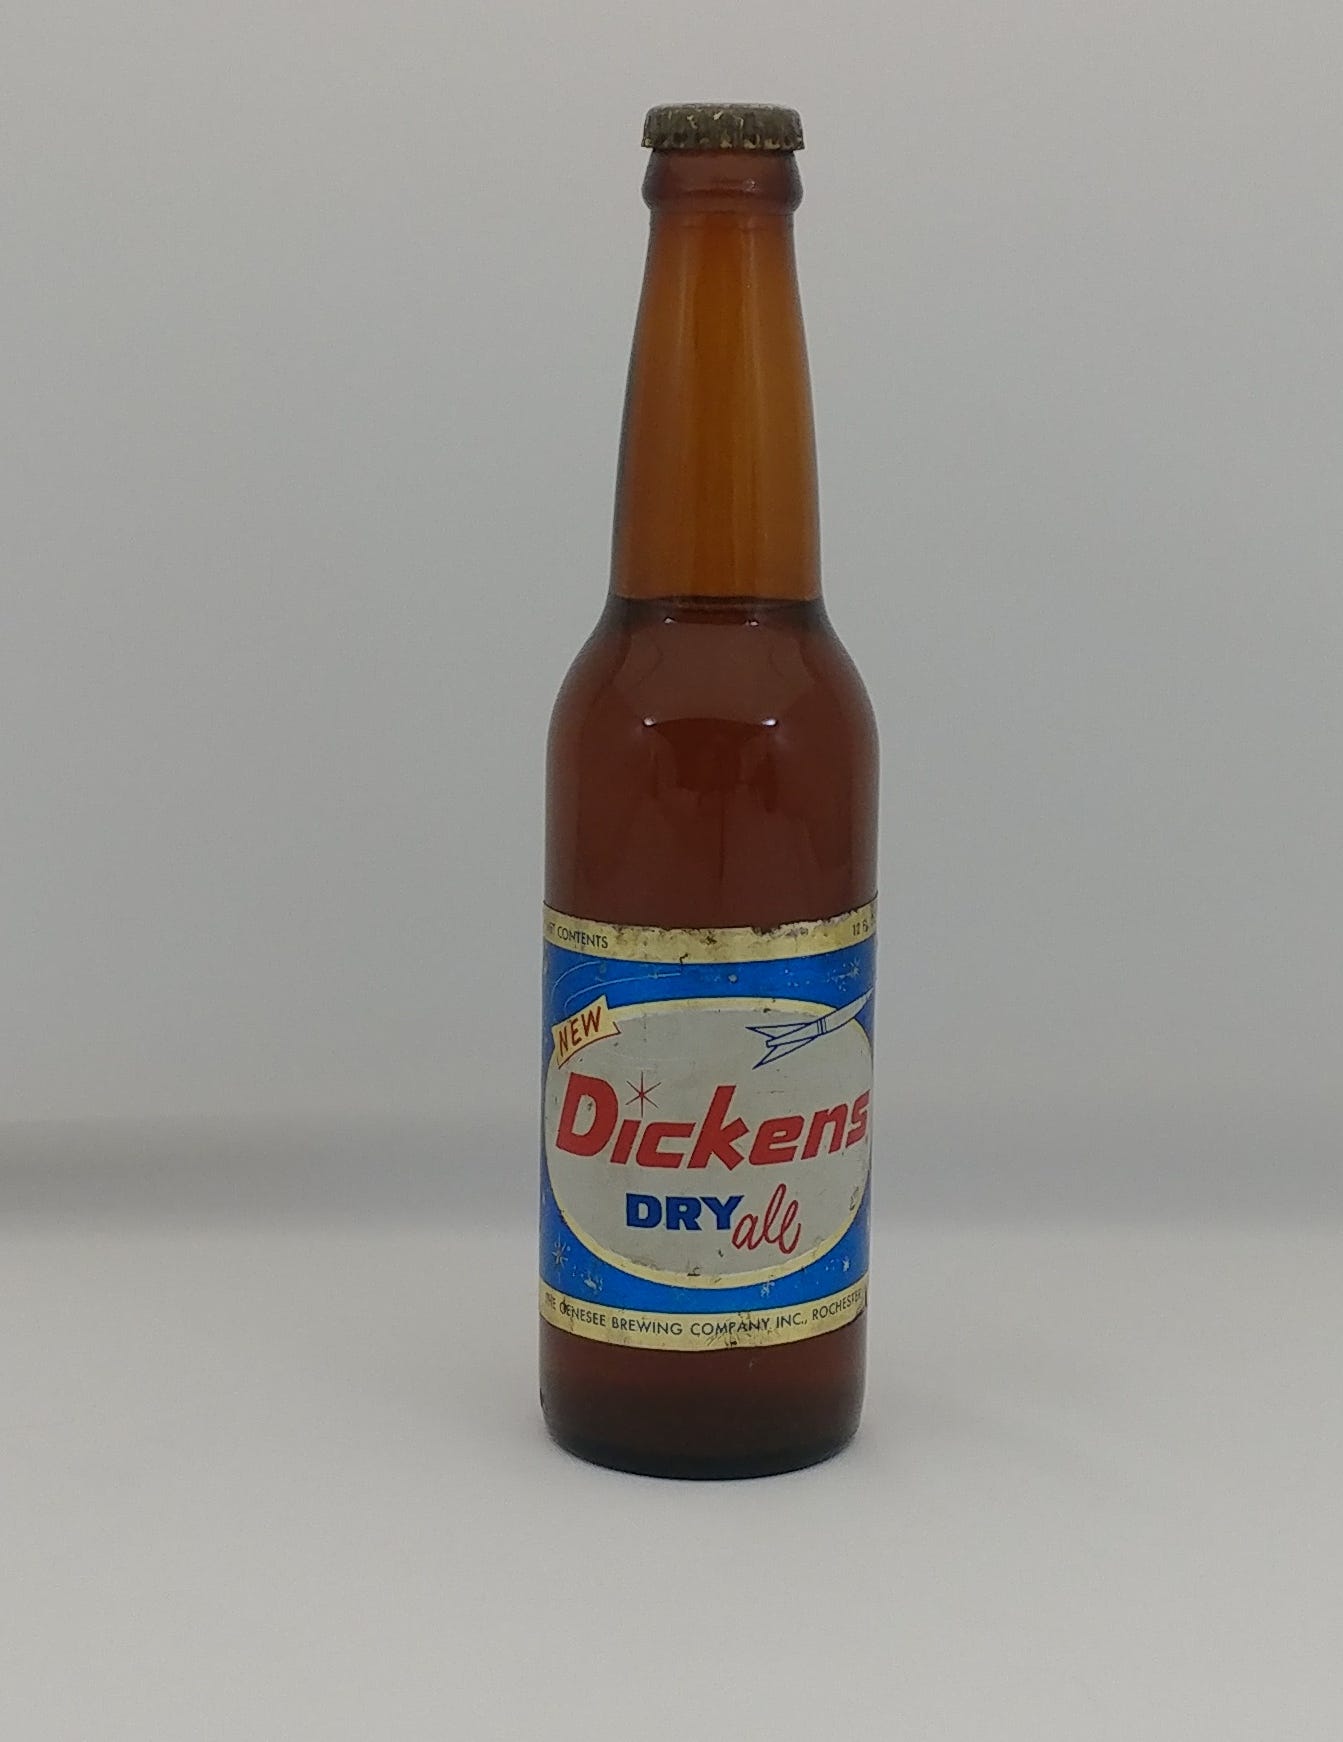 Genesee Dickens Dry Ale from 1956 to 1958.